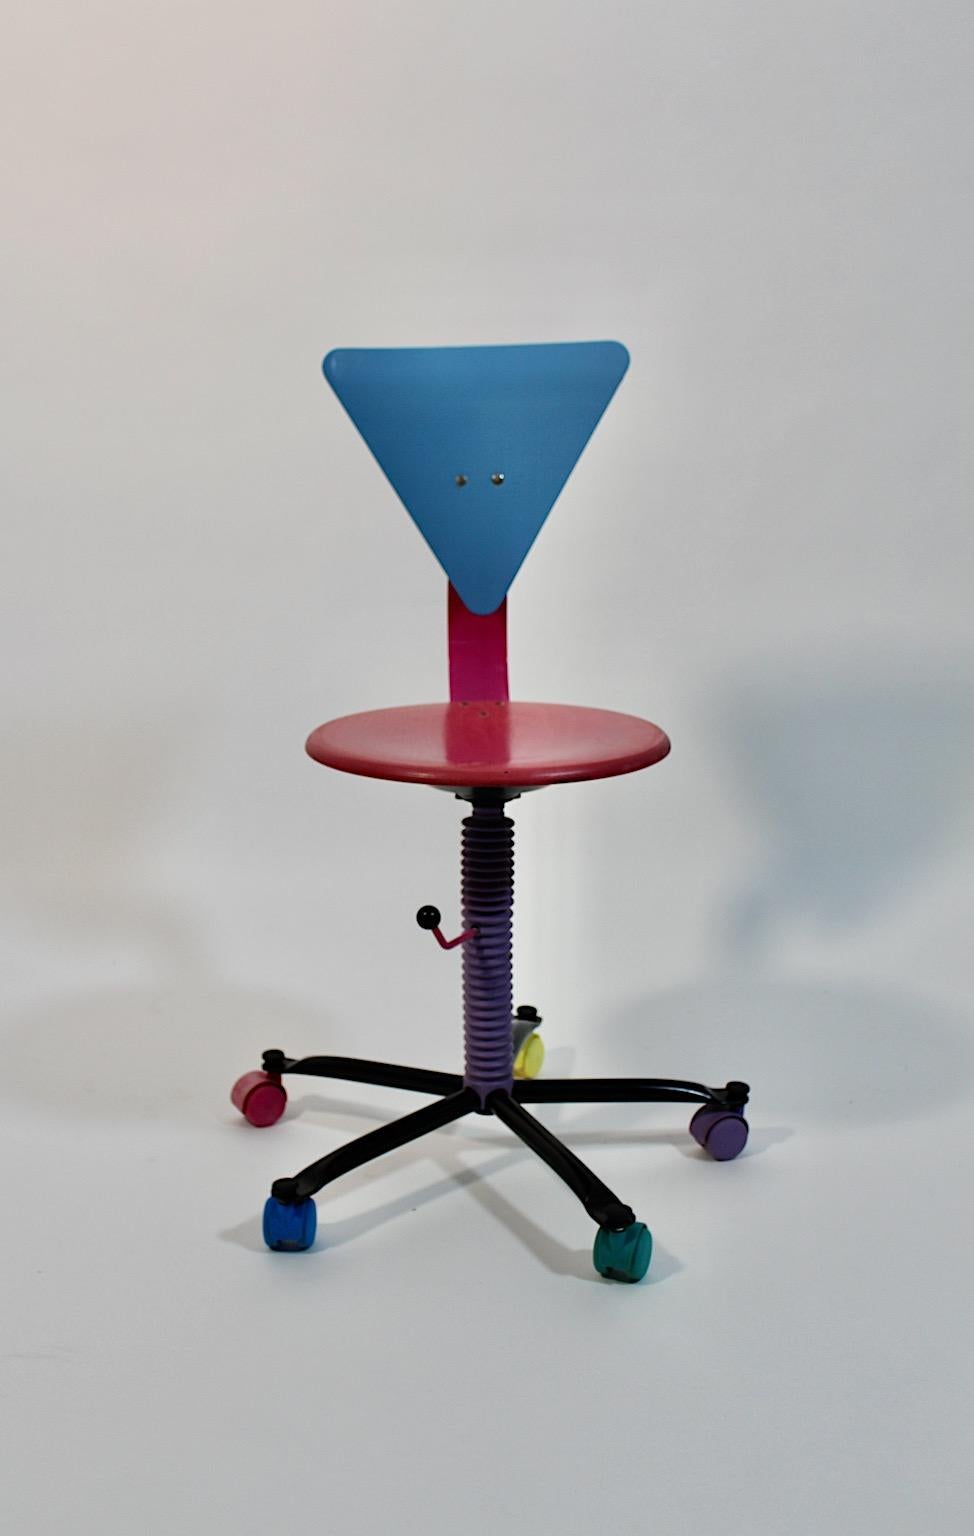 Pop Art vintage office desk chair from metal and wood in pink and blue 1980s.
An amazing office desk with swiveling function and adjustable seat height with a screw from 43 cm to 50 cm from stained plywood and metal.
While the triangular back